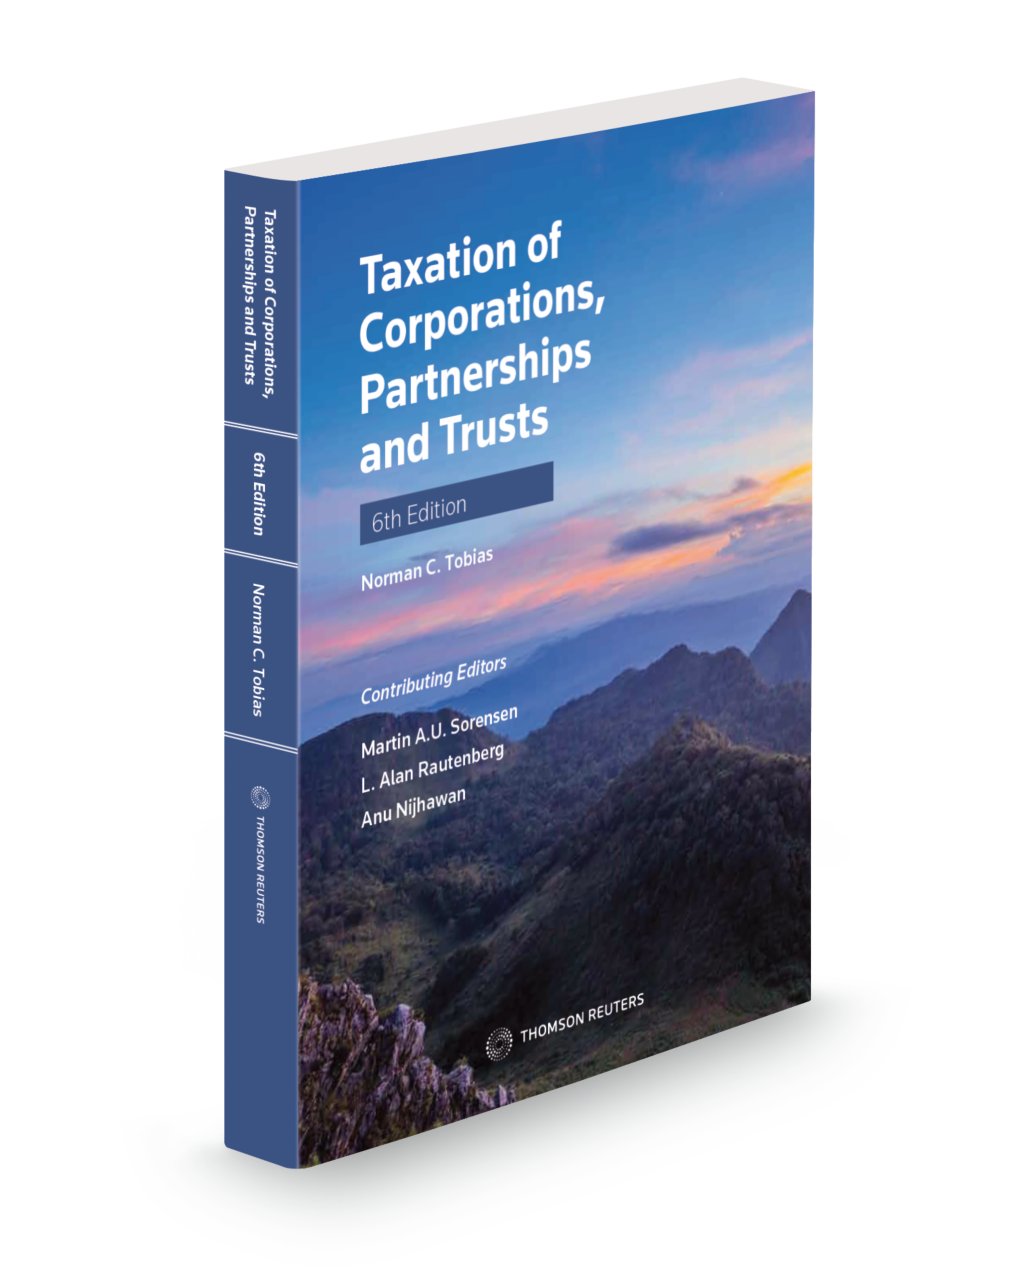 Cover of Taxation of Corporations, Partnerships and Trusts, 6th Edition, Softbound book